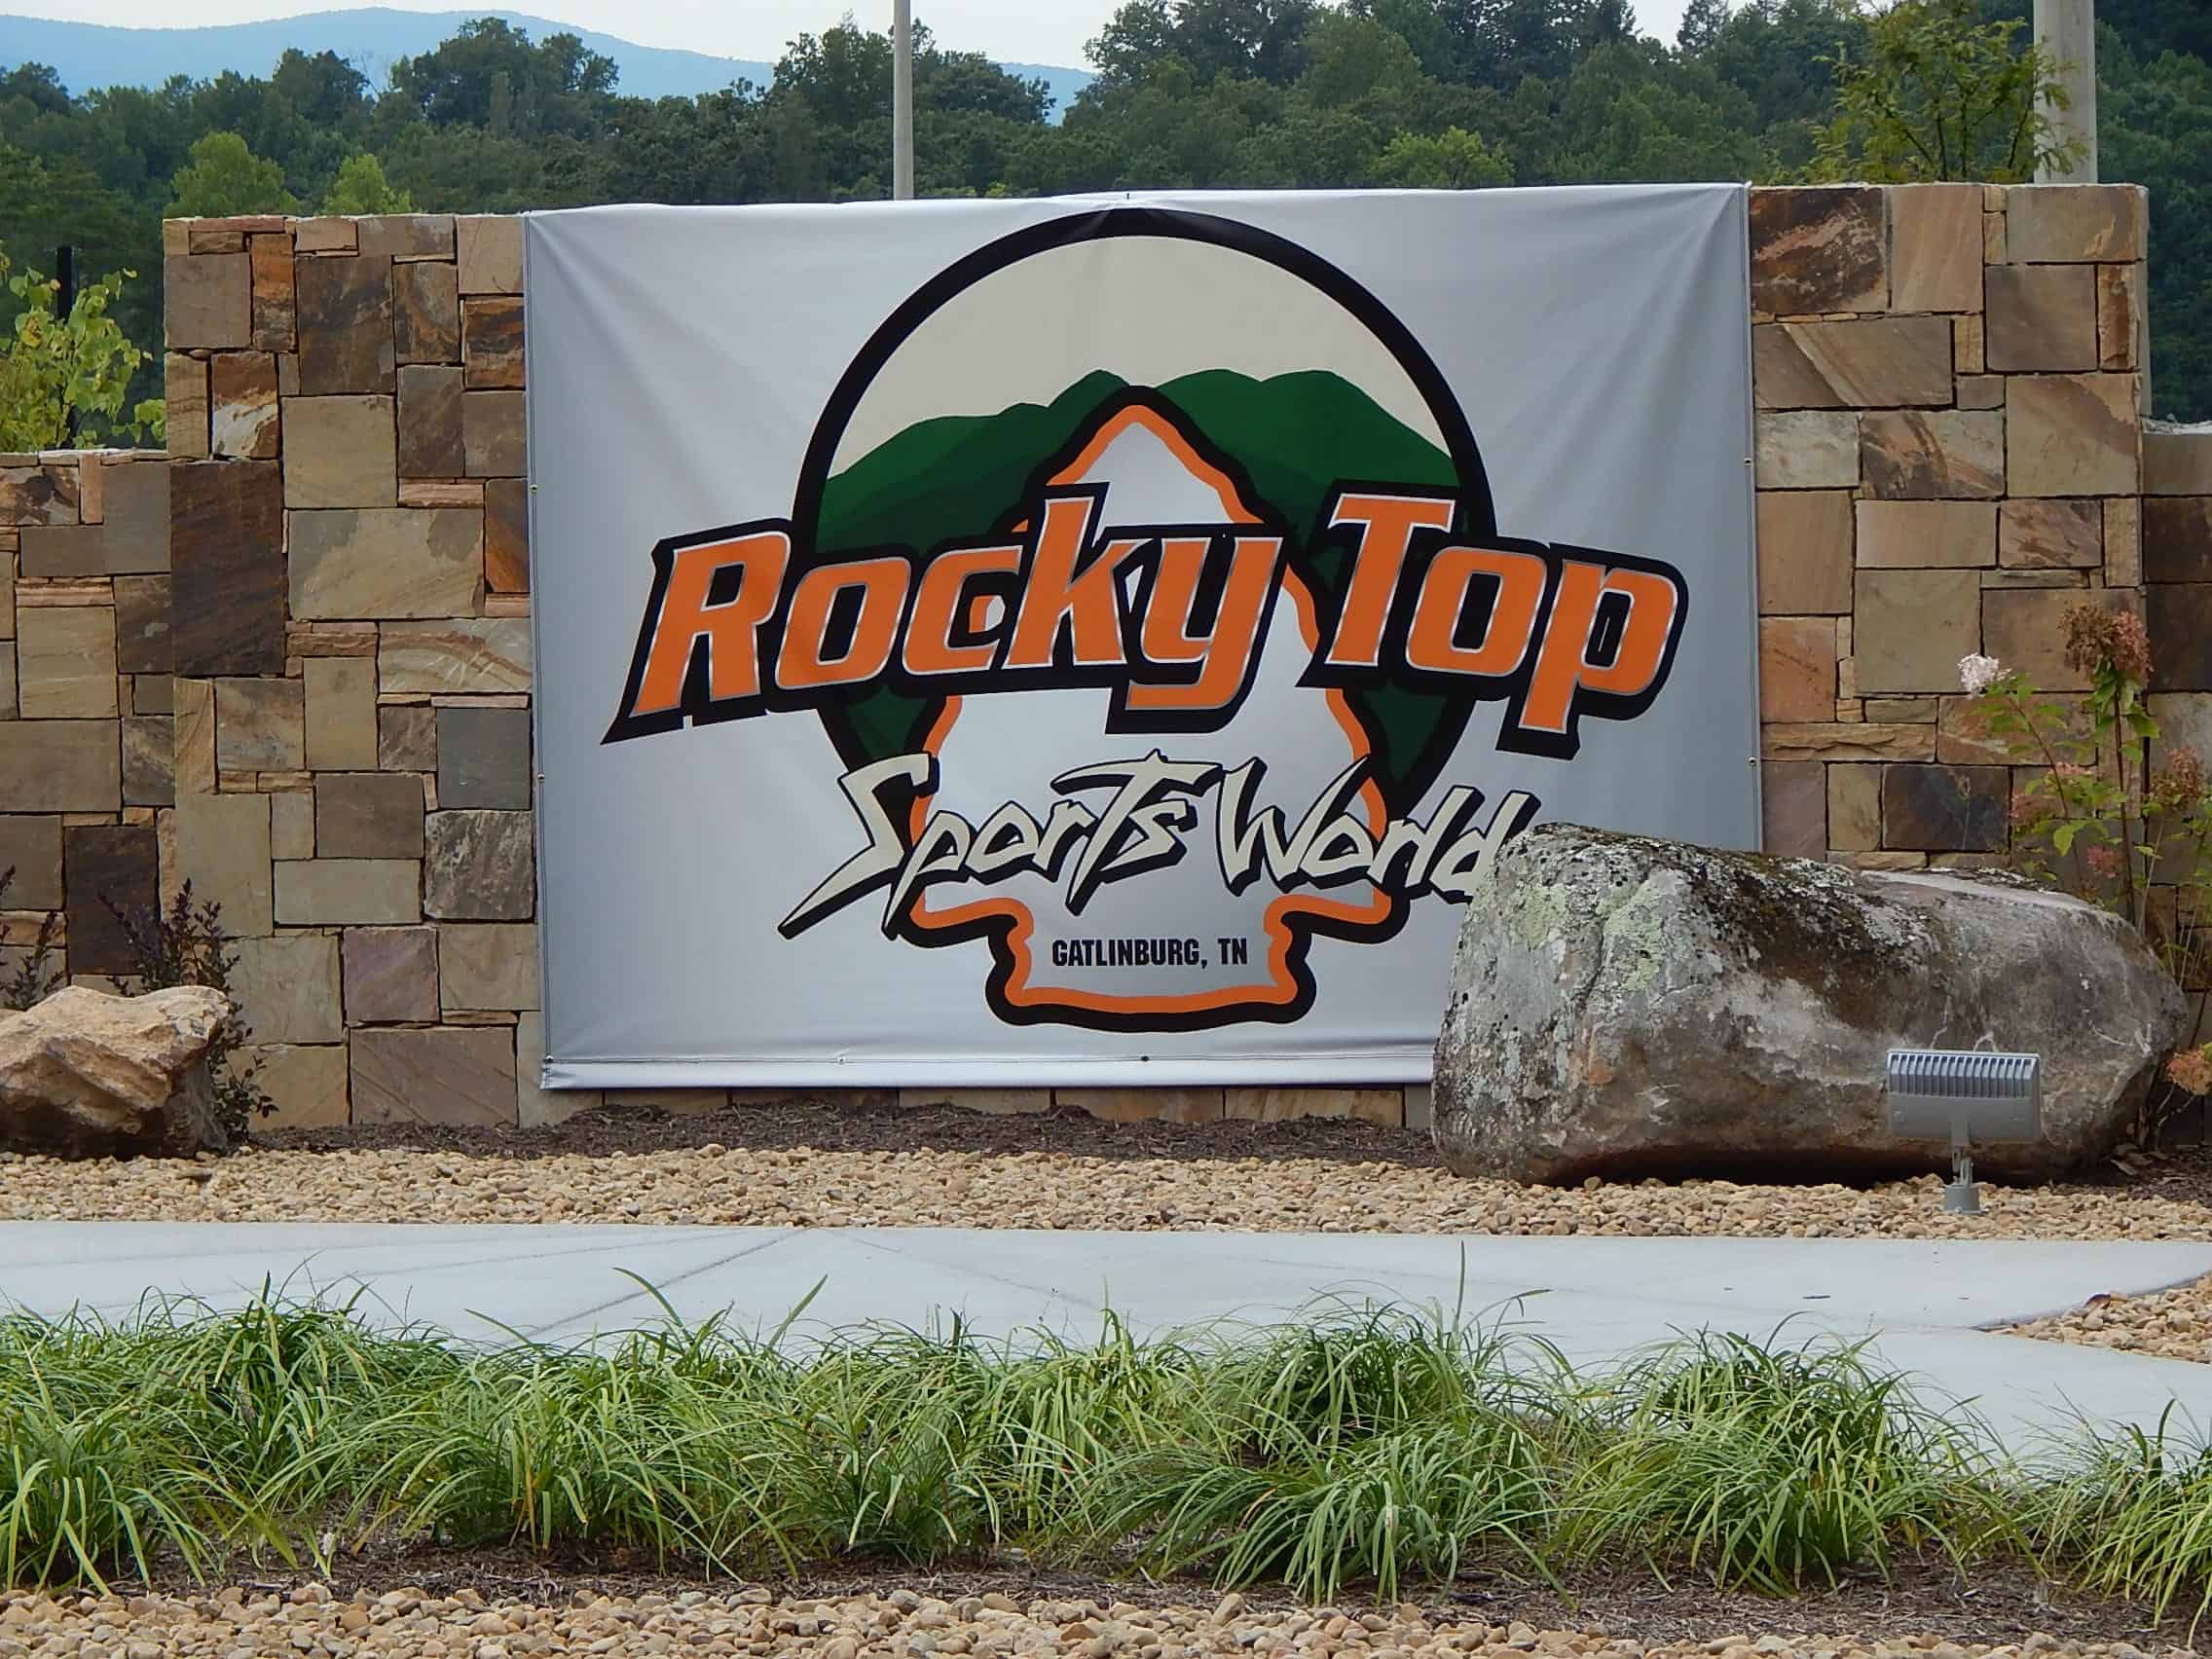 rocky top sports world sign